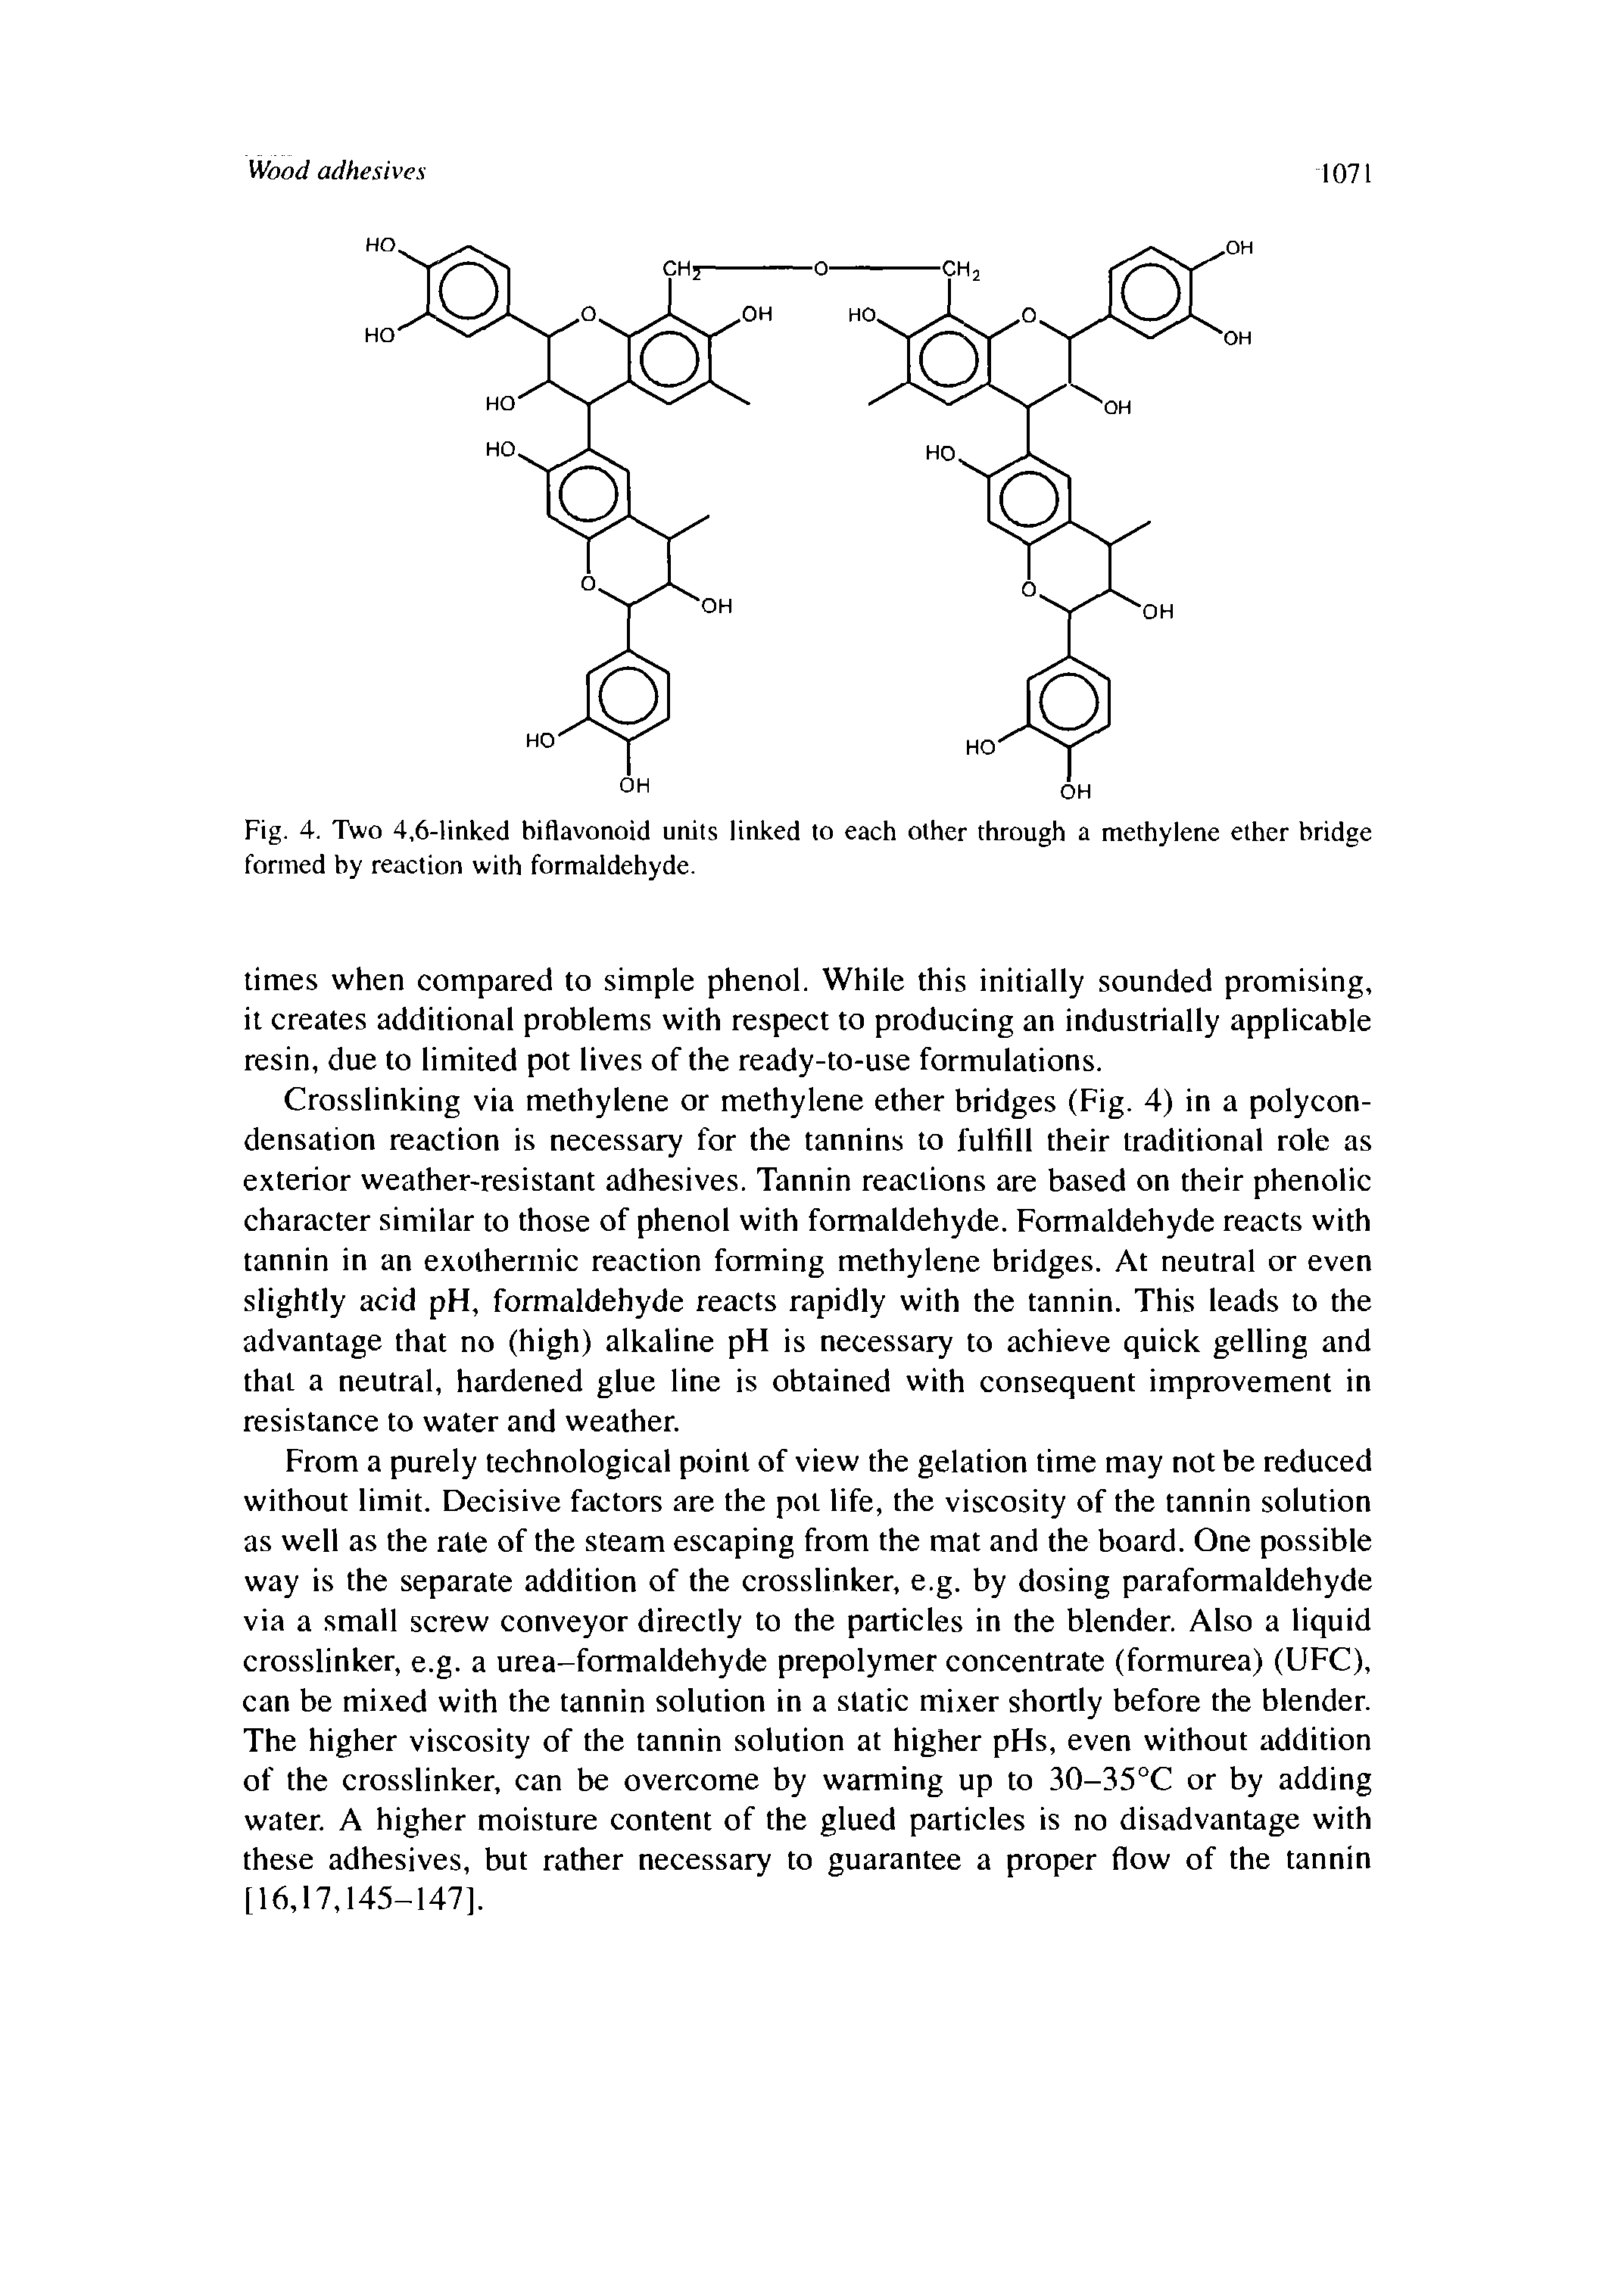 Fig. 4. Two 4,6-linked biflavonoid units linked to each other through a methylene ether bridge formed by reaction with formaldehyde.